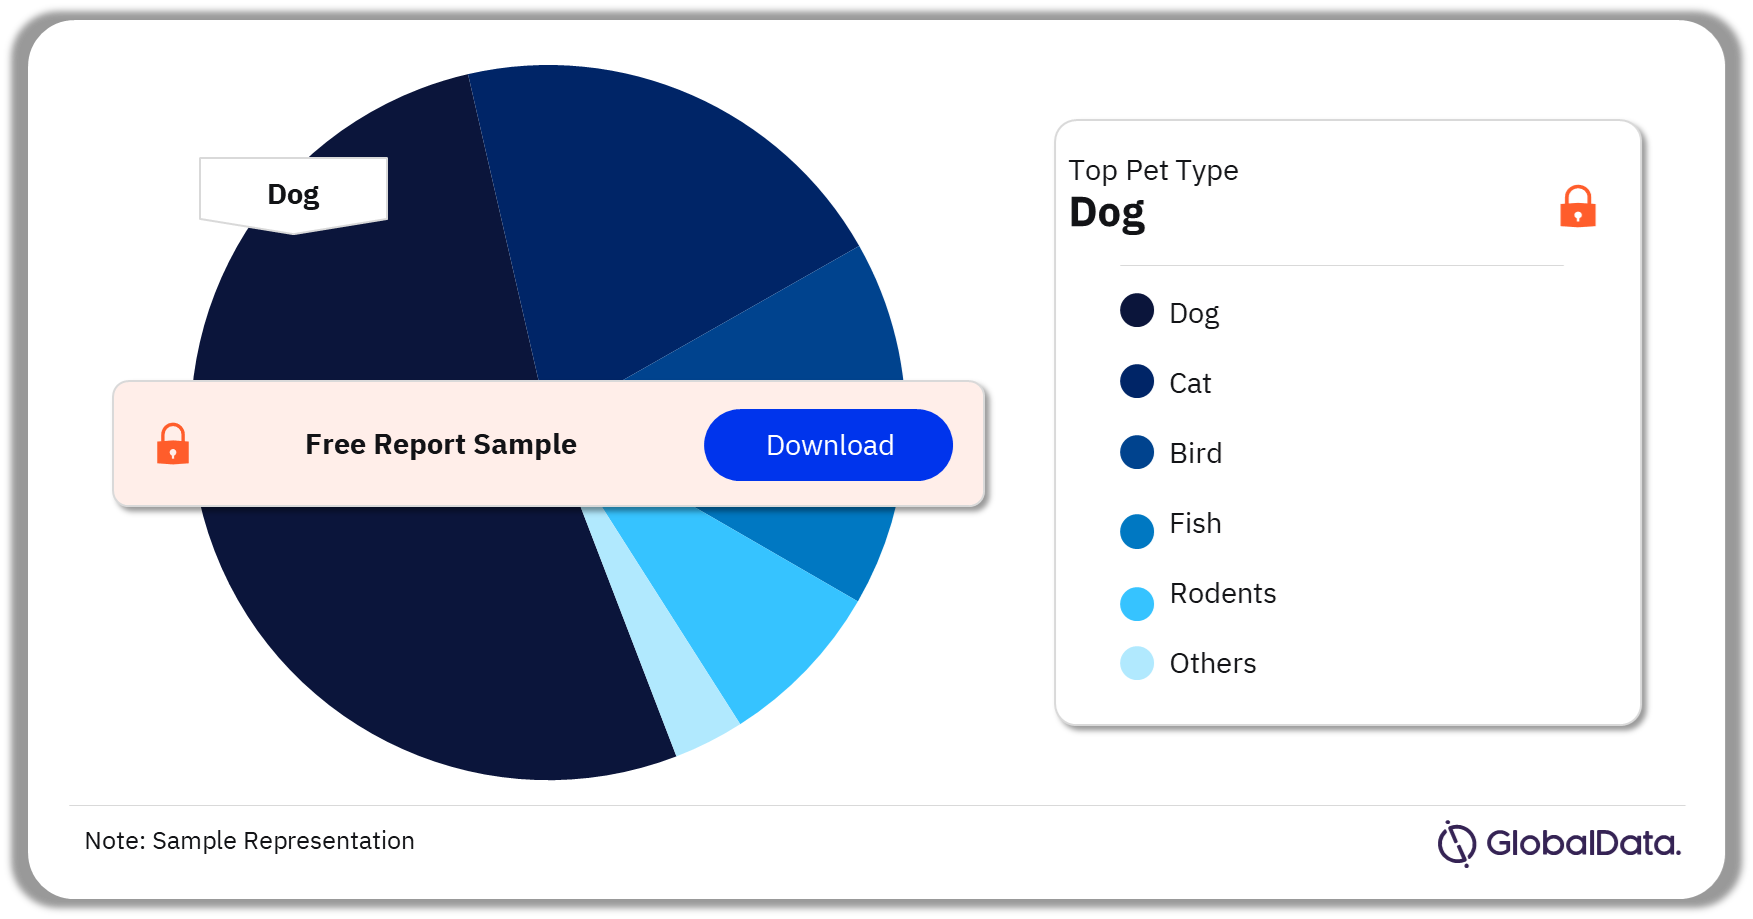 Pet Supplements Market Analysis by Pet Type, 2023 (%)